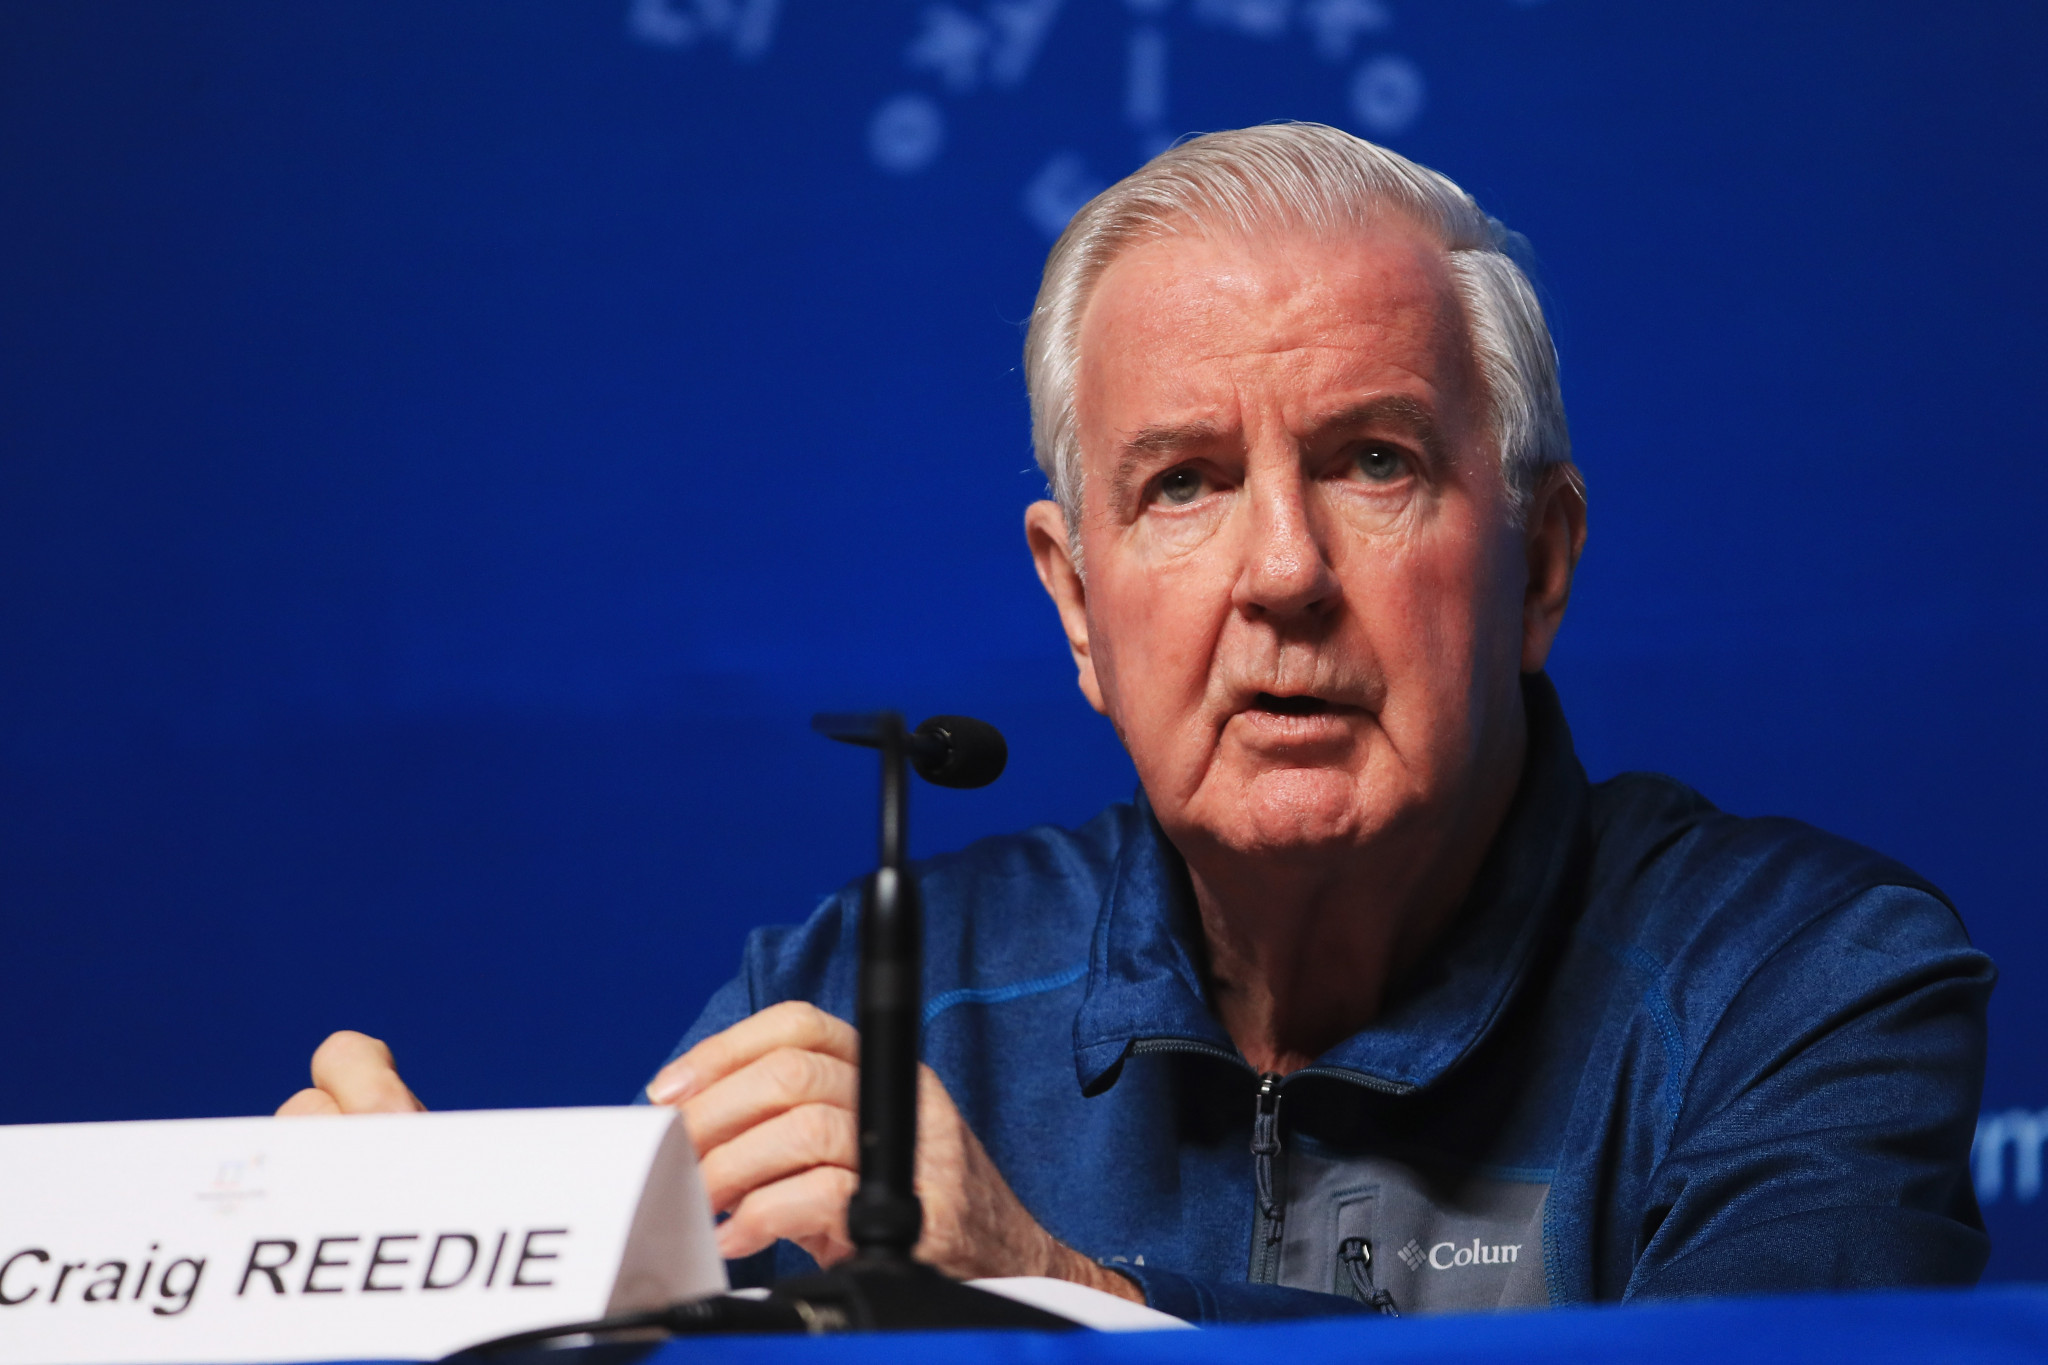 WADA President Sir Craig Reedie said the meeting is an important one for the region and the global anti-doping movement ©Getty Images